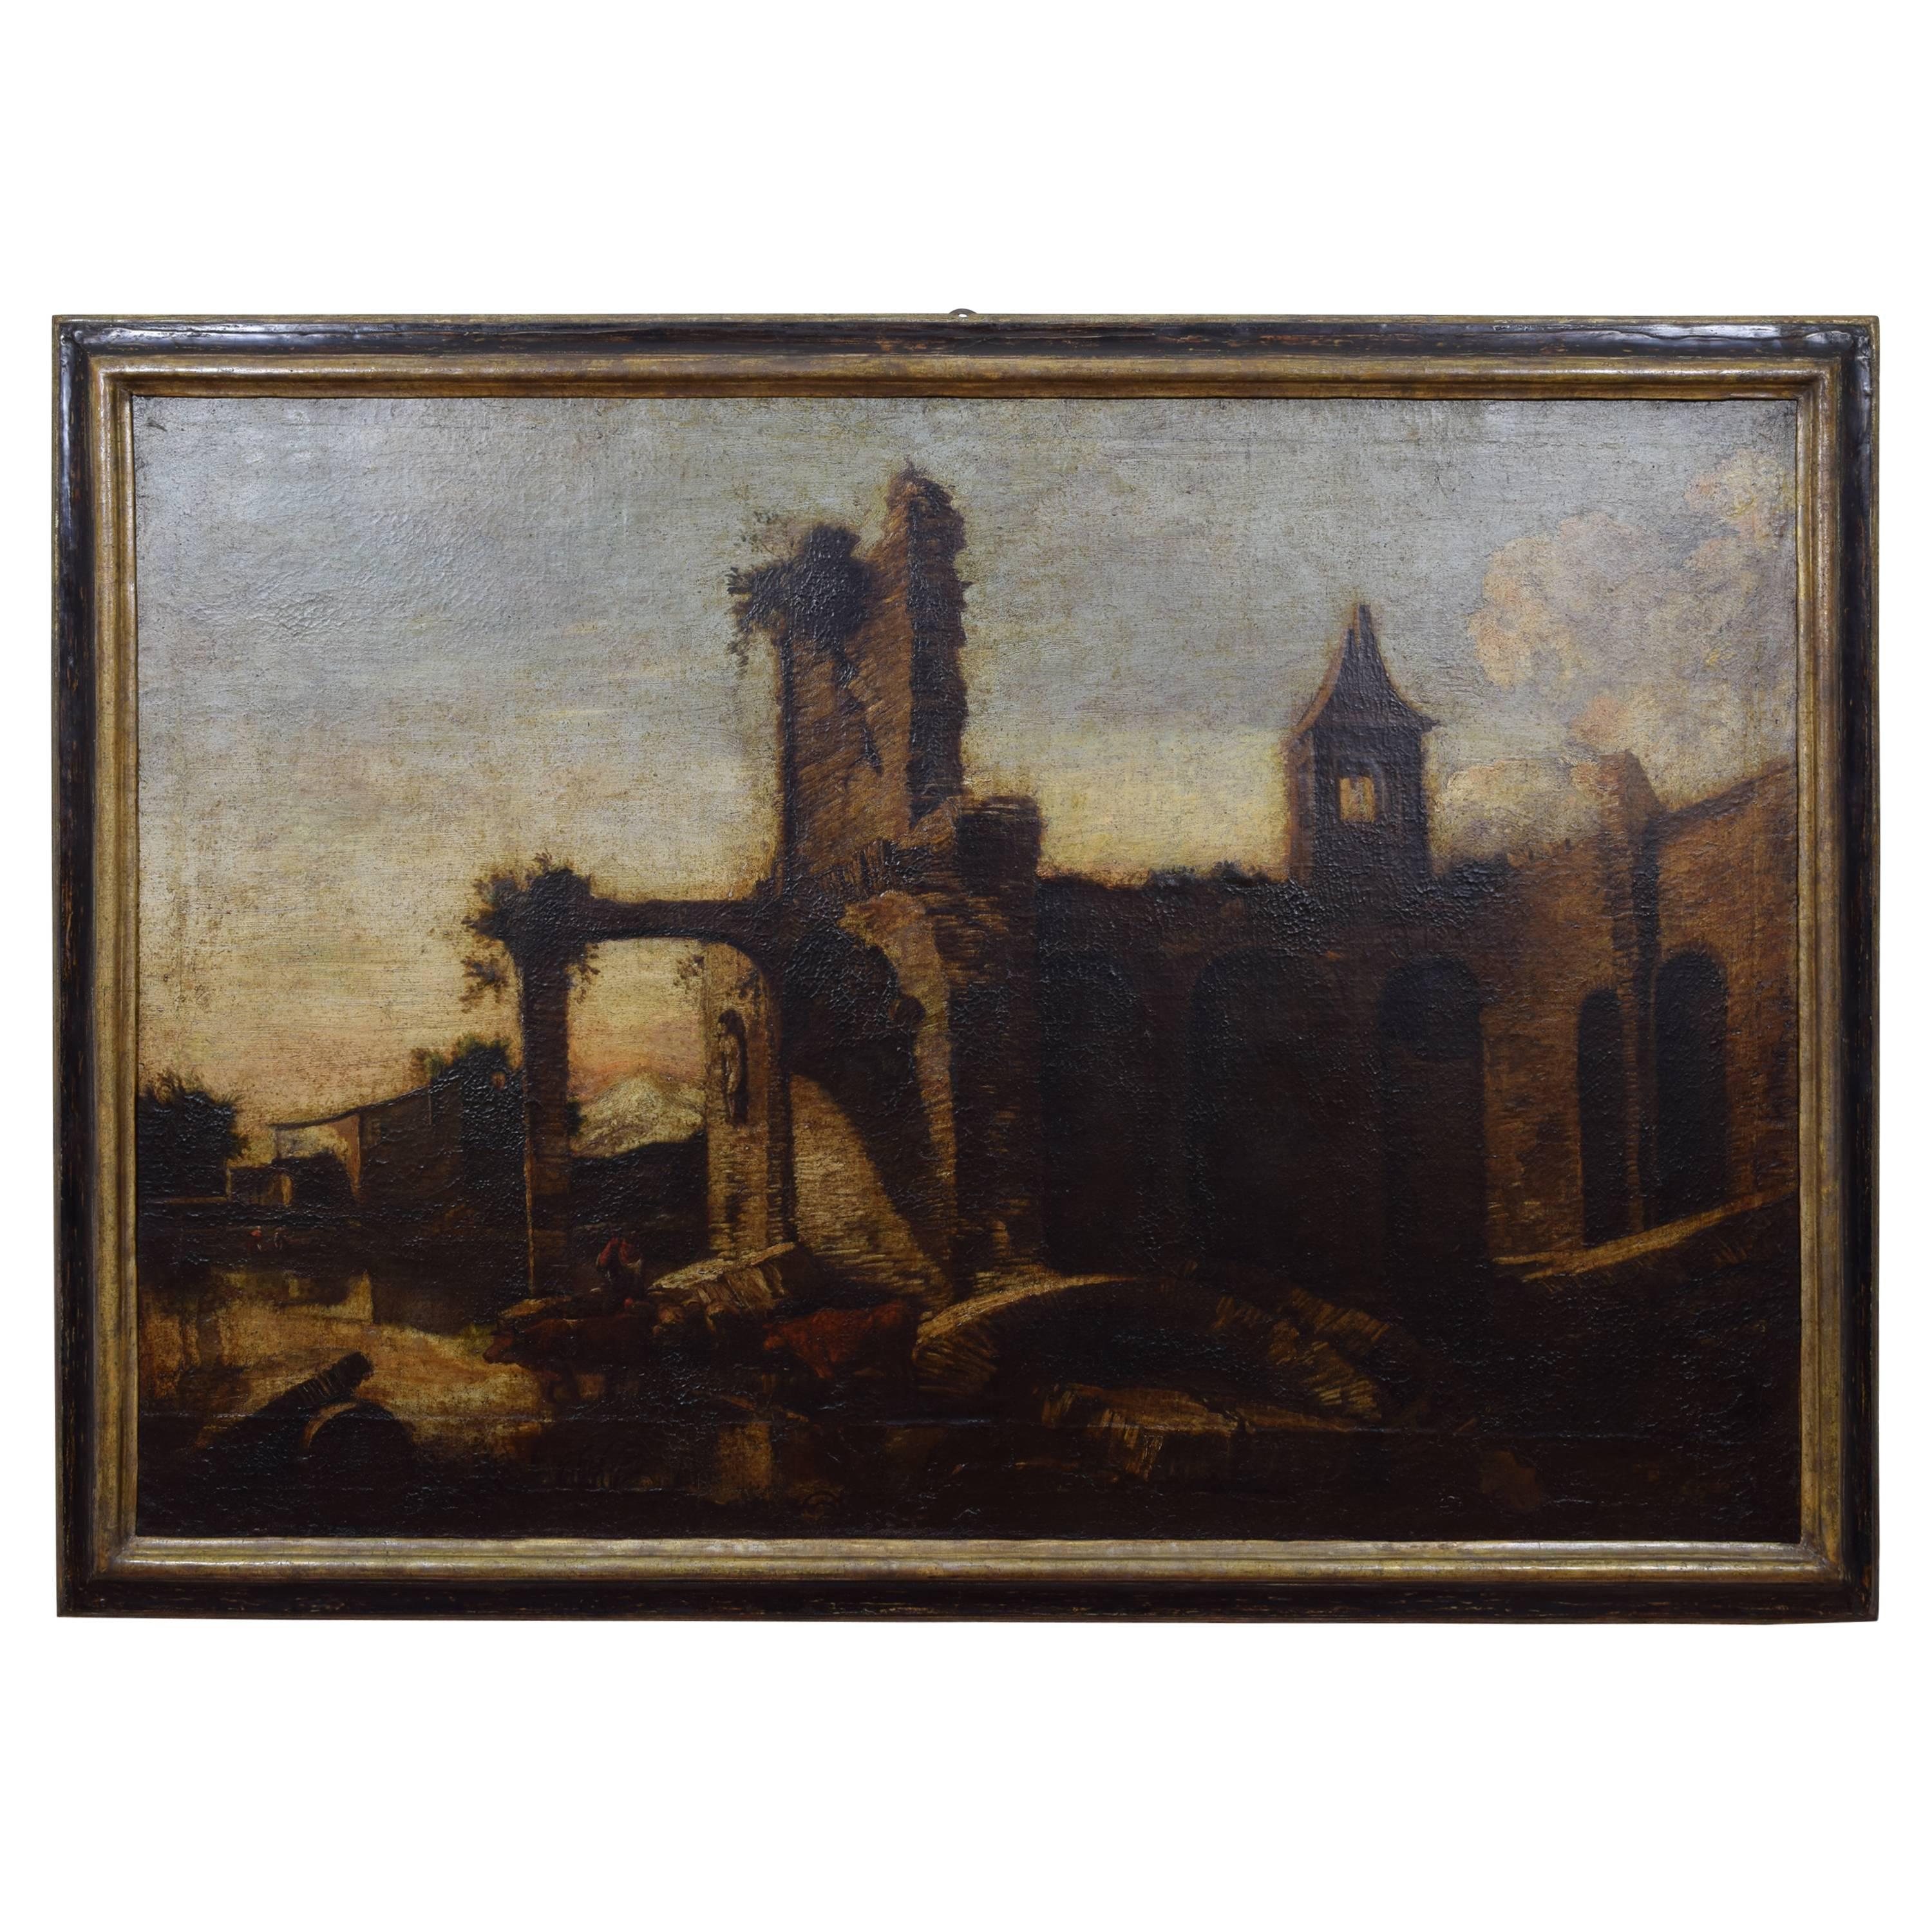 Italian Oil on Canvas, "Landscape with Ruins and Herds, " 17th Century